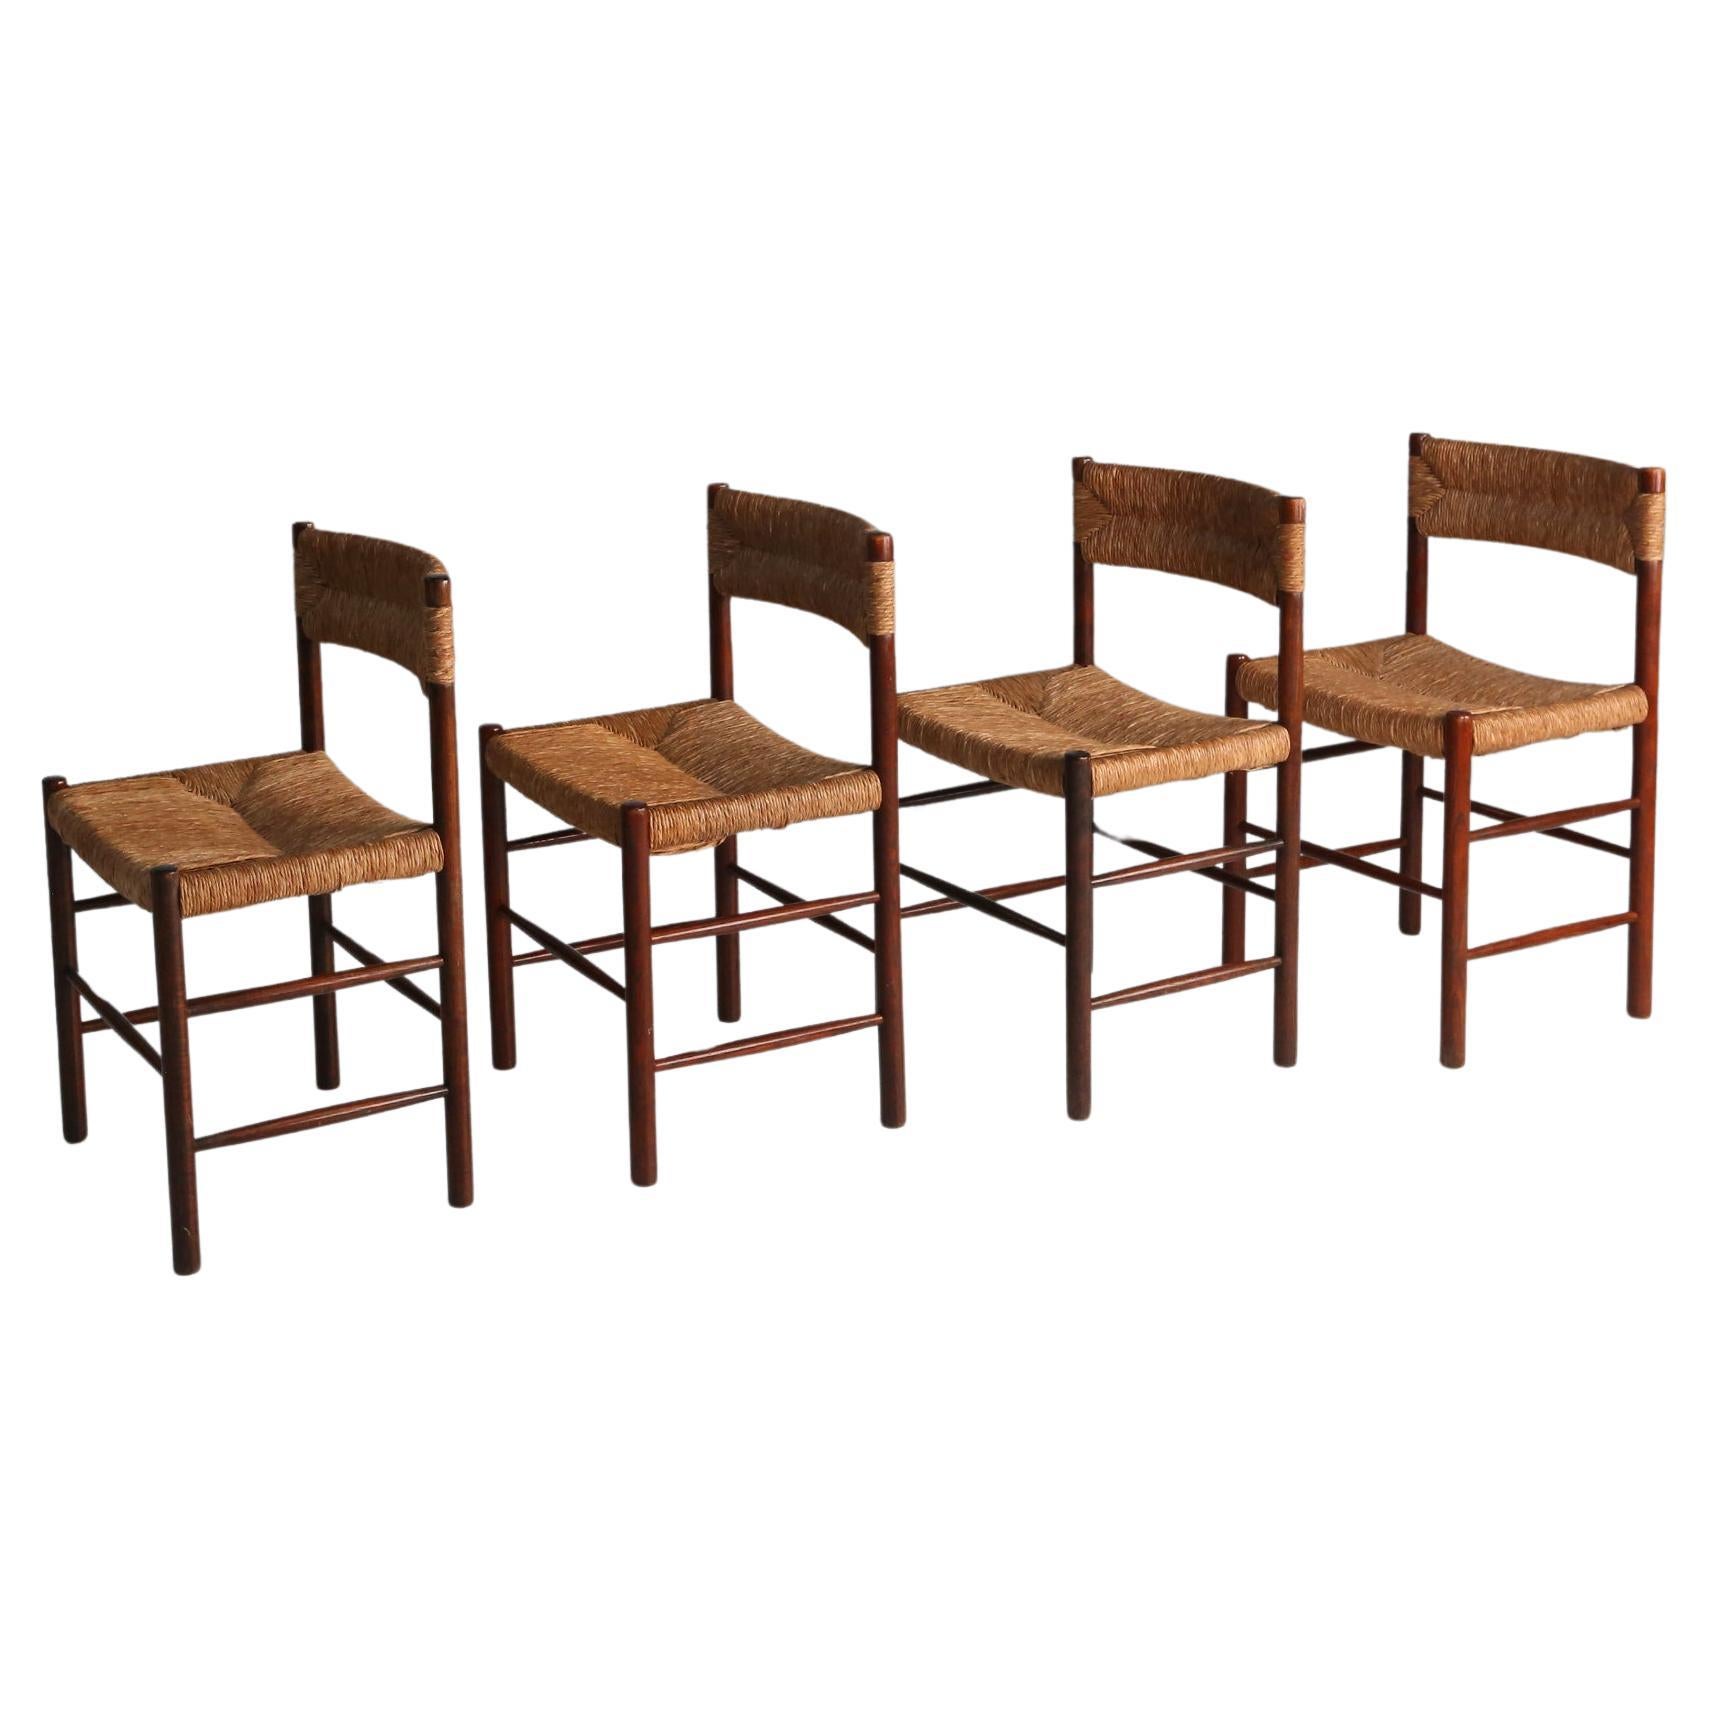 Set of 4 Dordogne chairs by Charlotte Perriand for Sentou, France, 1950s For Sale